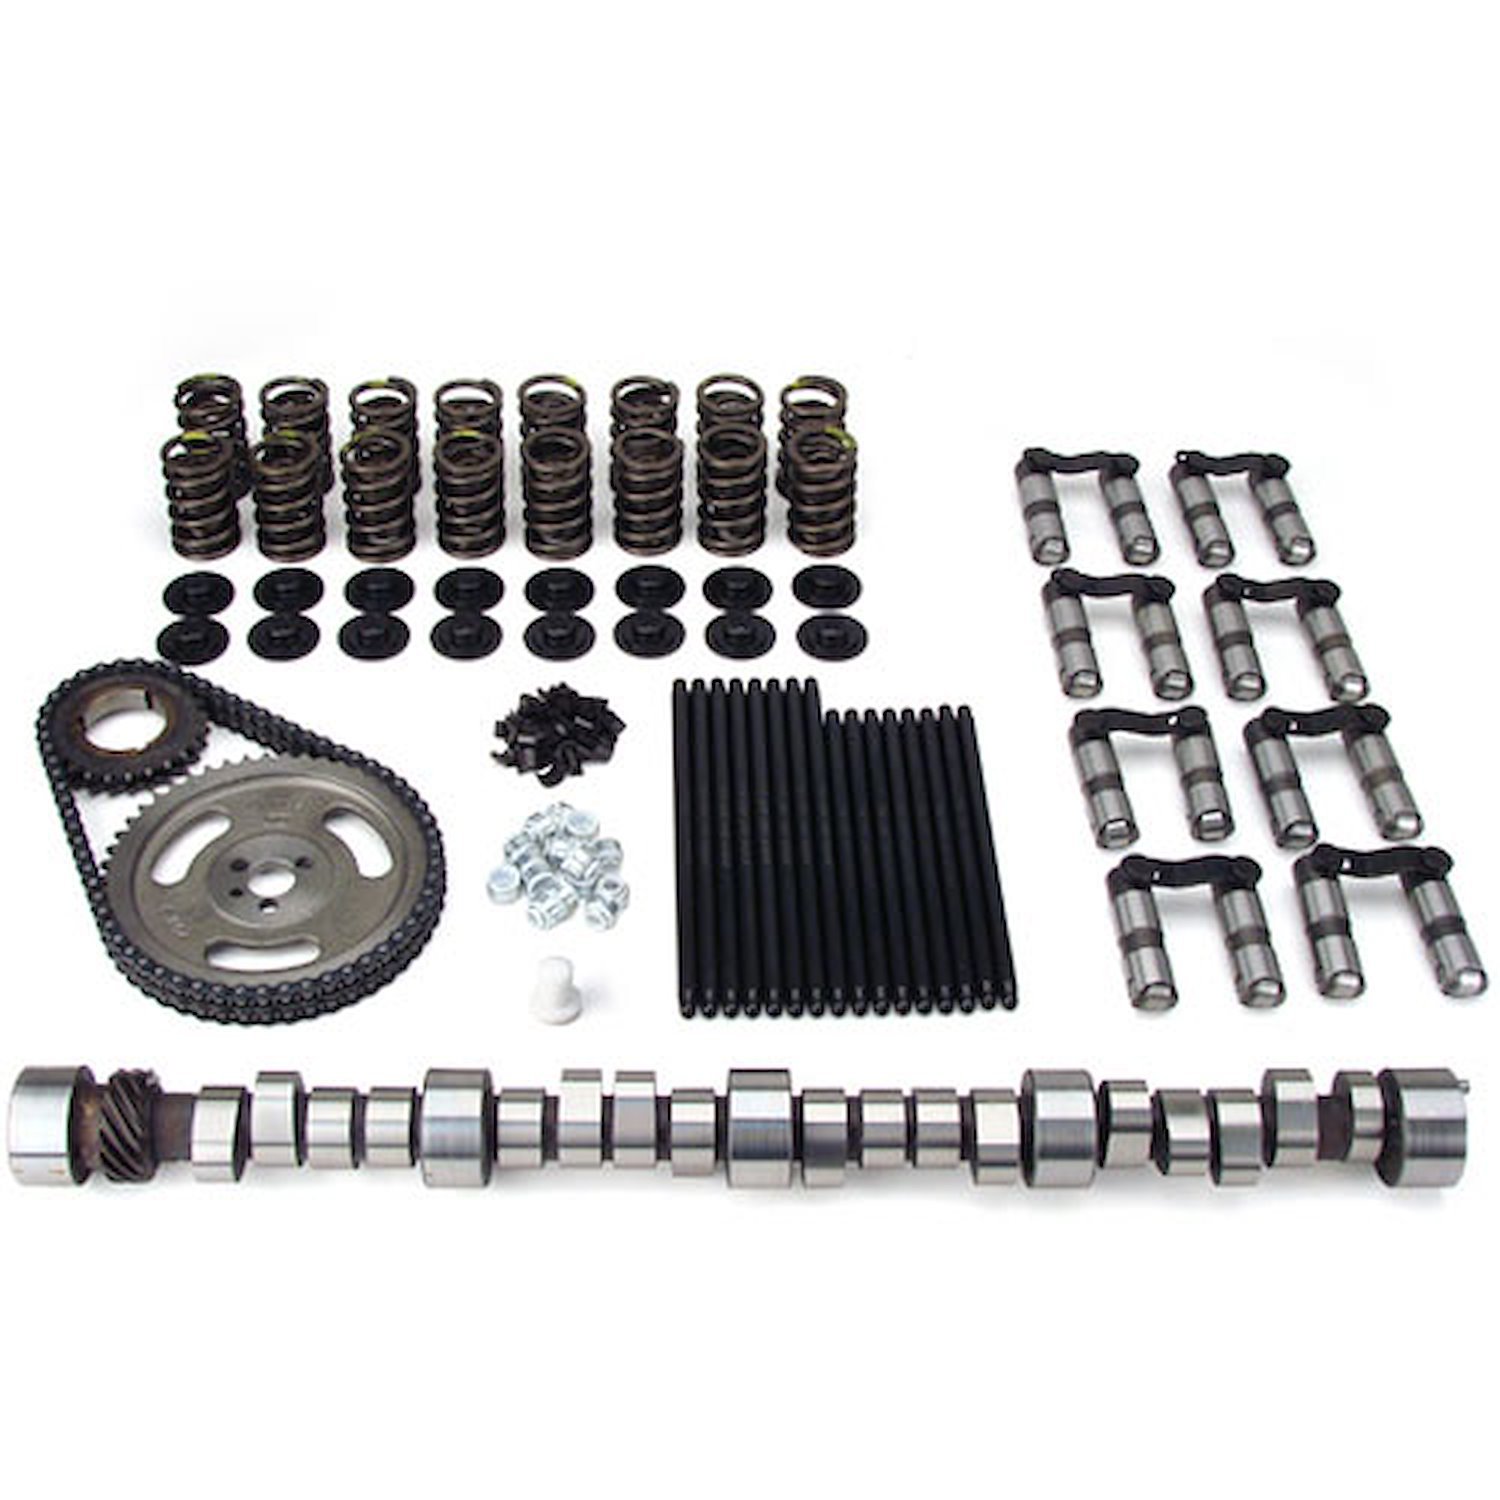 Magnum Hydraulic Roller Camshaft Complete Kit Chevy Small Block 305 & 350 Factory Roller Lift: .525"/.525"